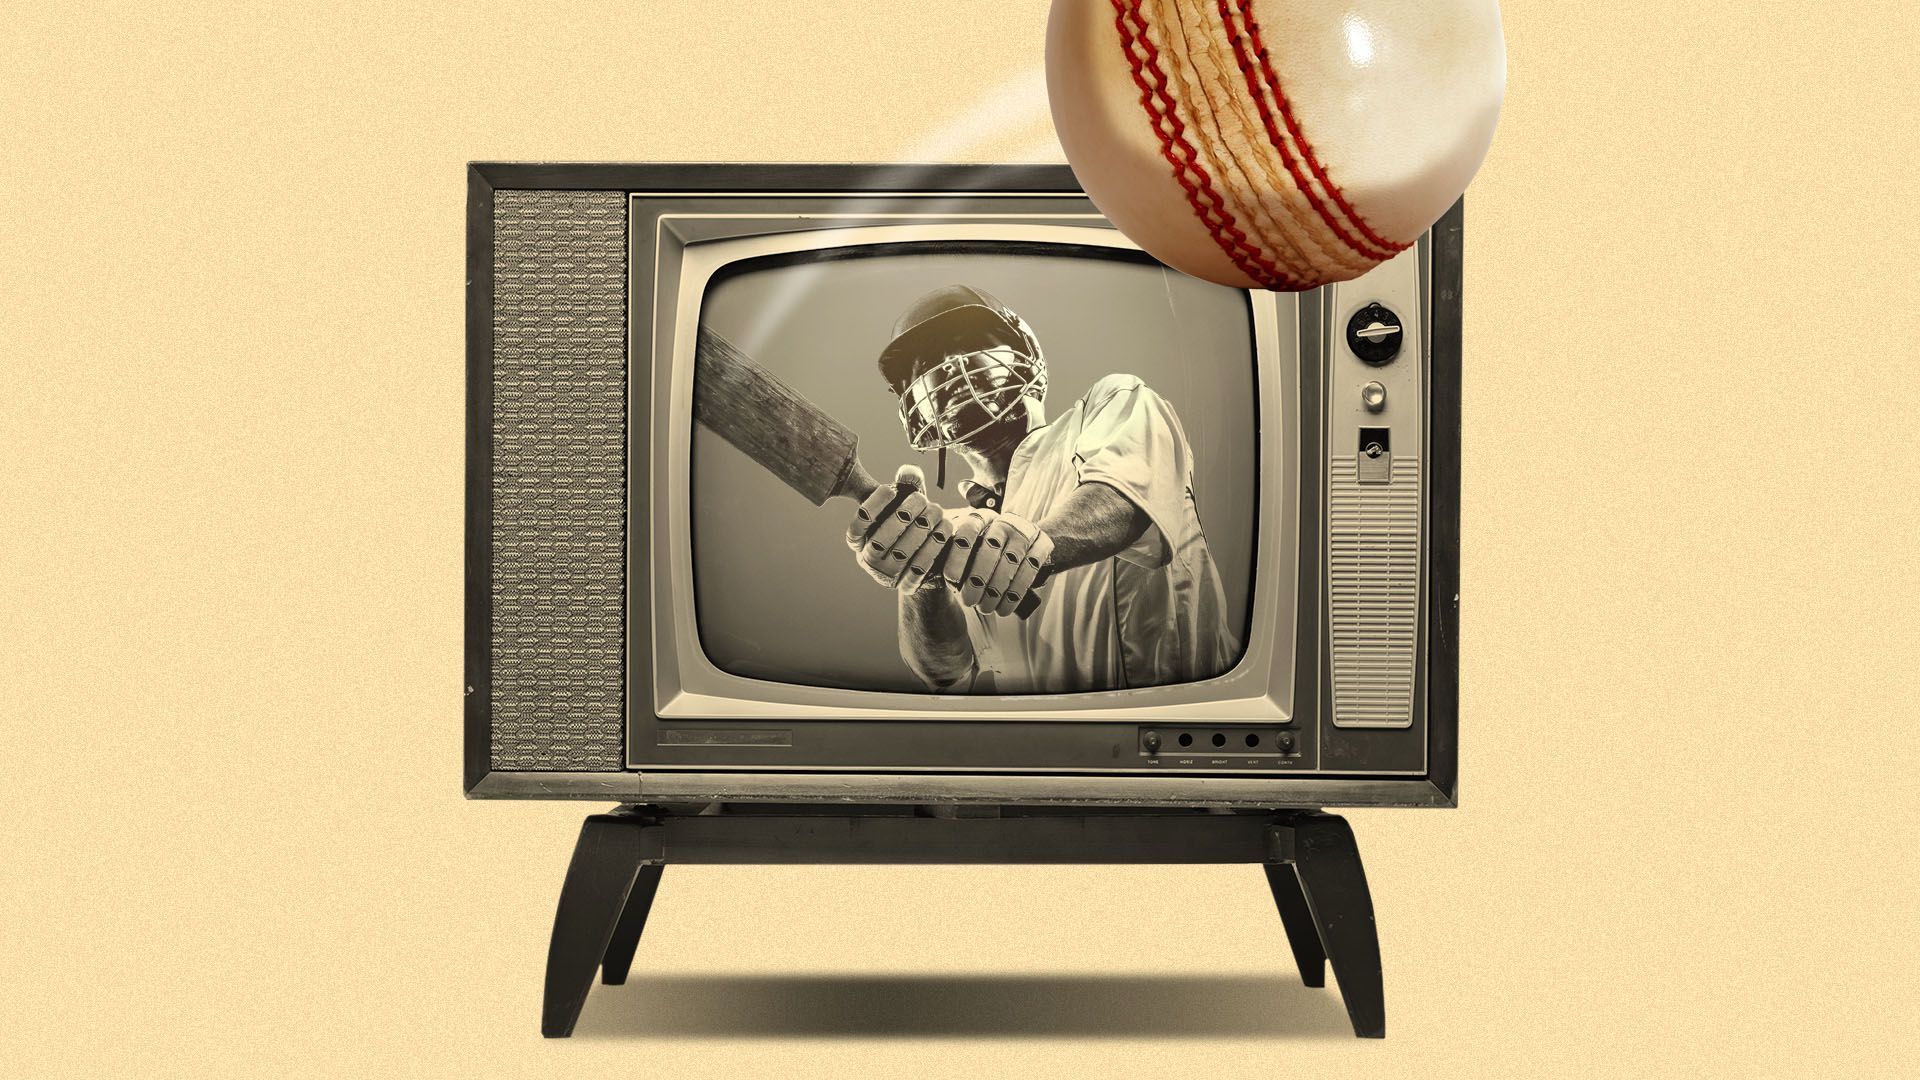 Illustration of a cricket playing hitting a ball through a television screen